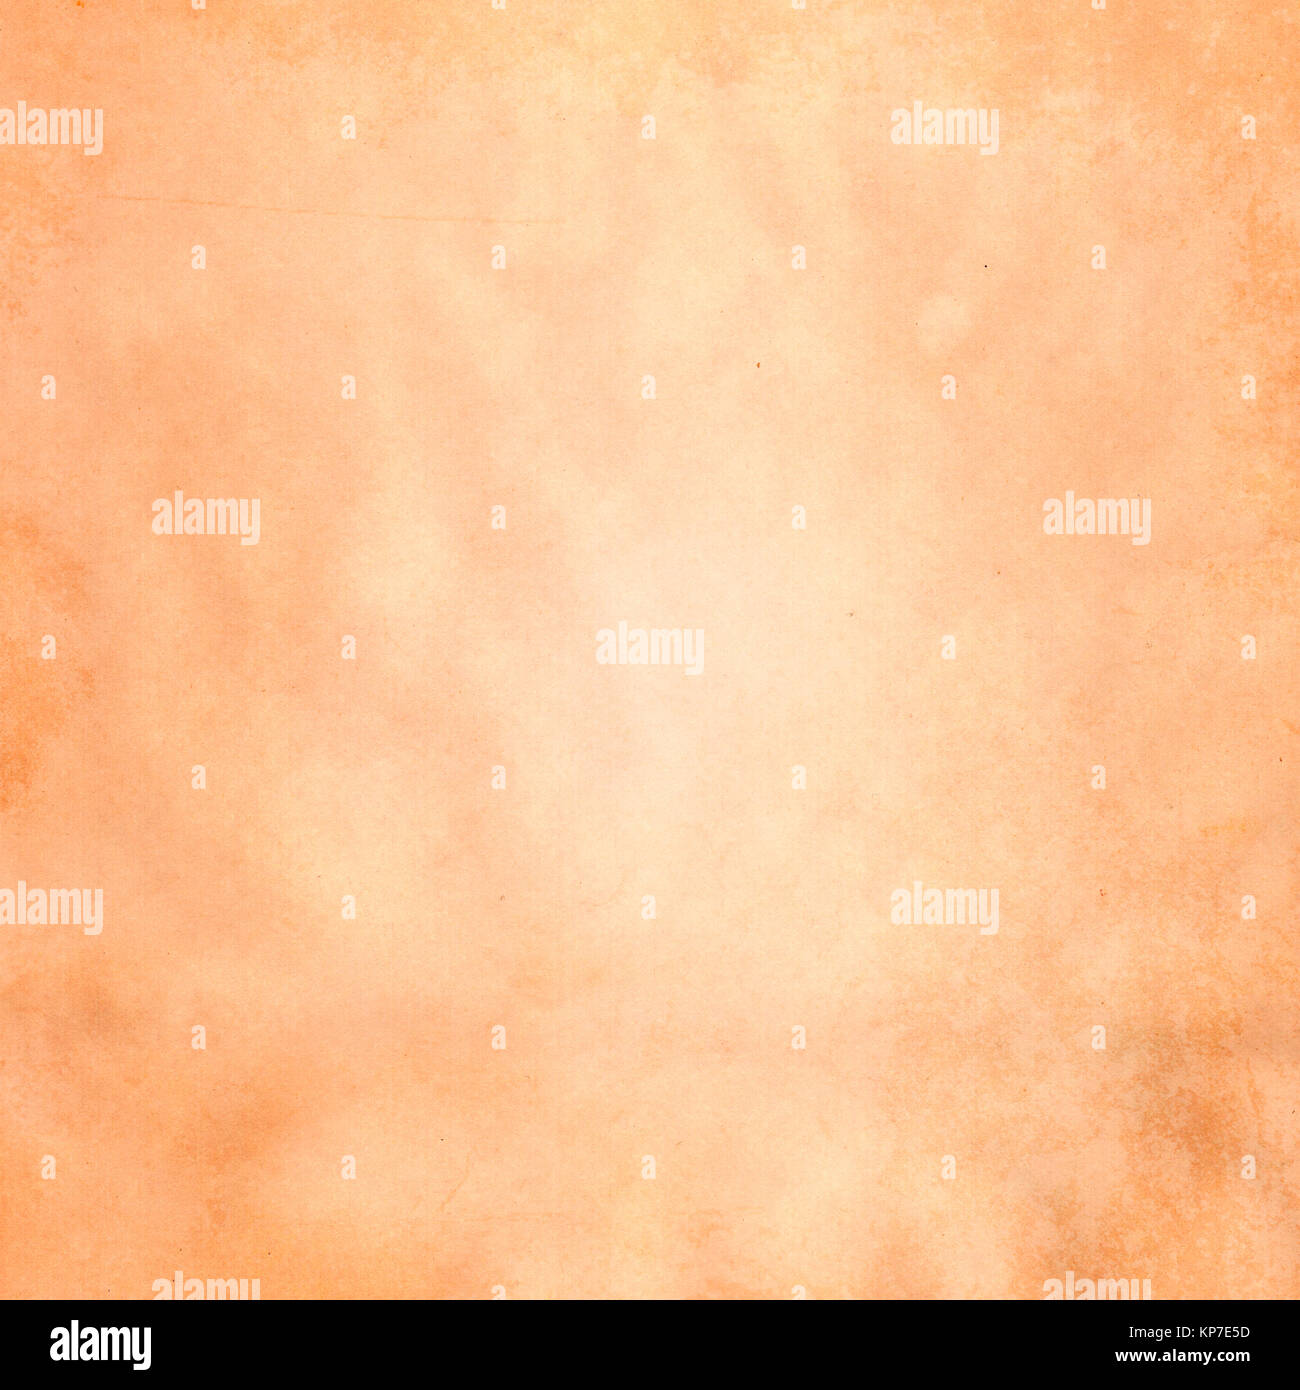 Old grunge paper background. Natural old paper texture for the design. Stock Photo